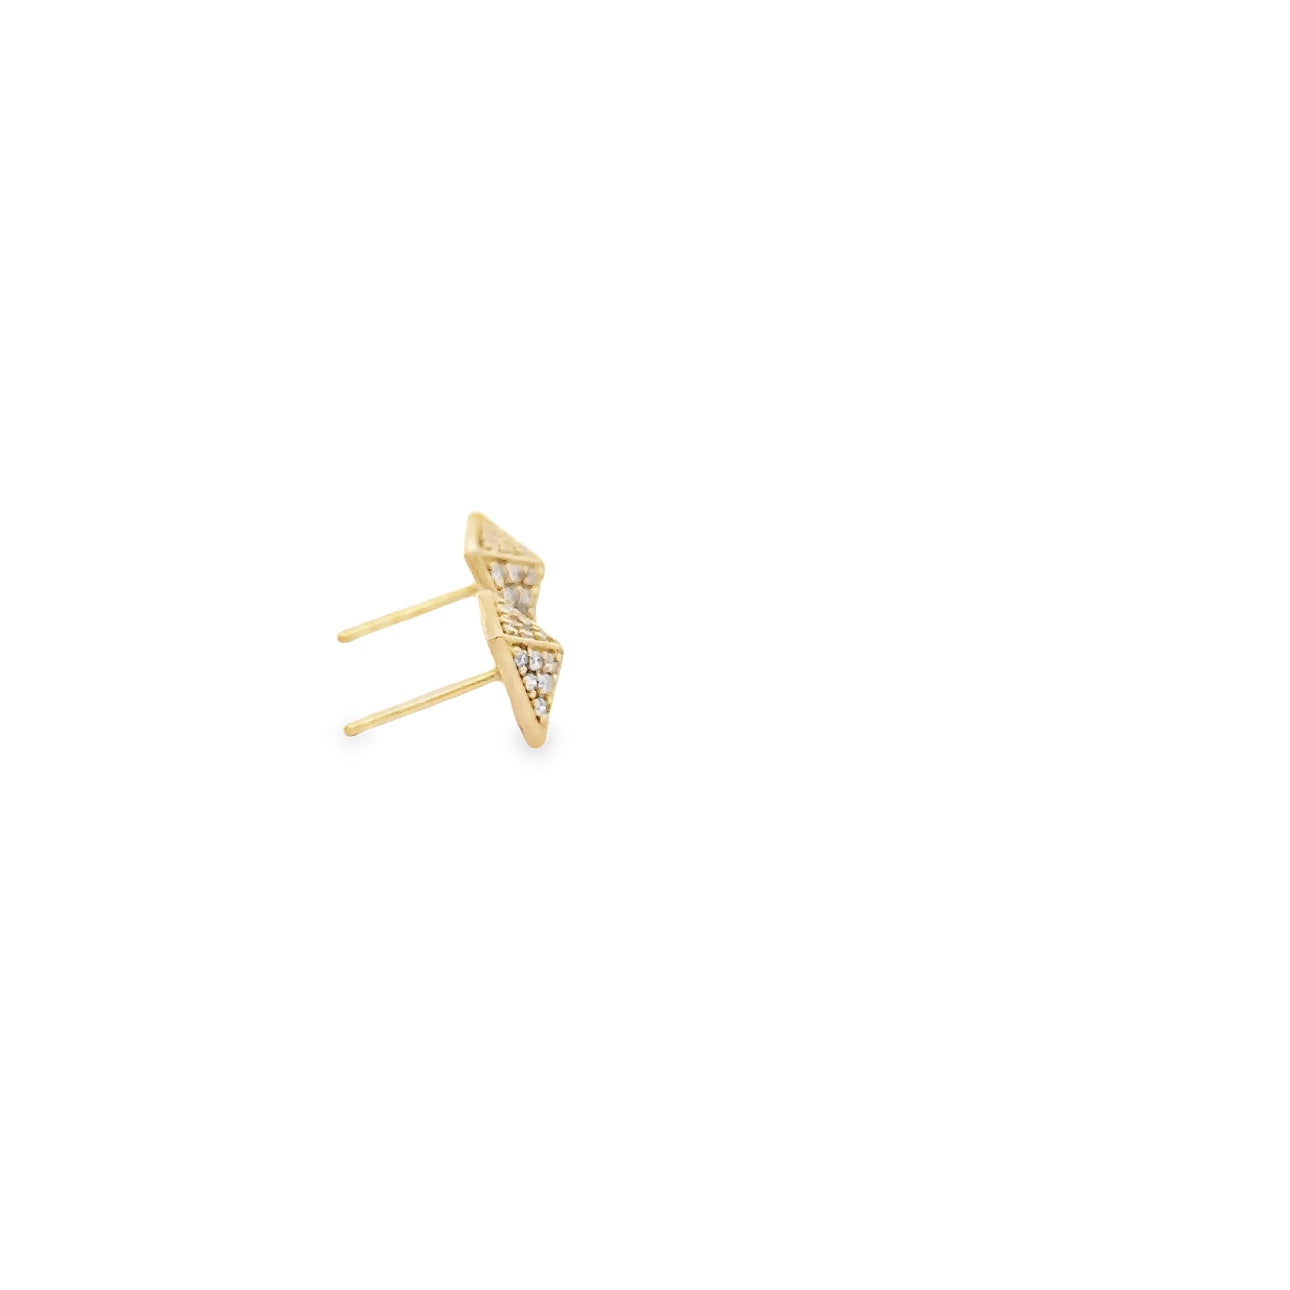 WD1312 14kt Gold Pave Square Stud earrings